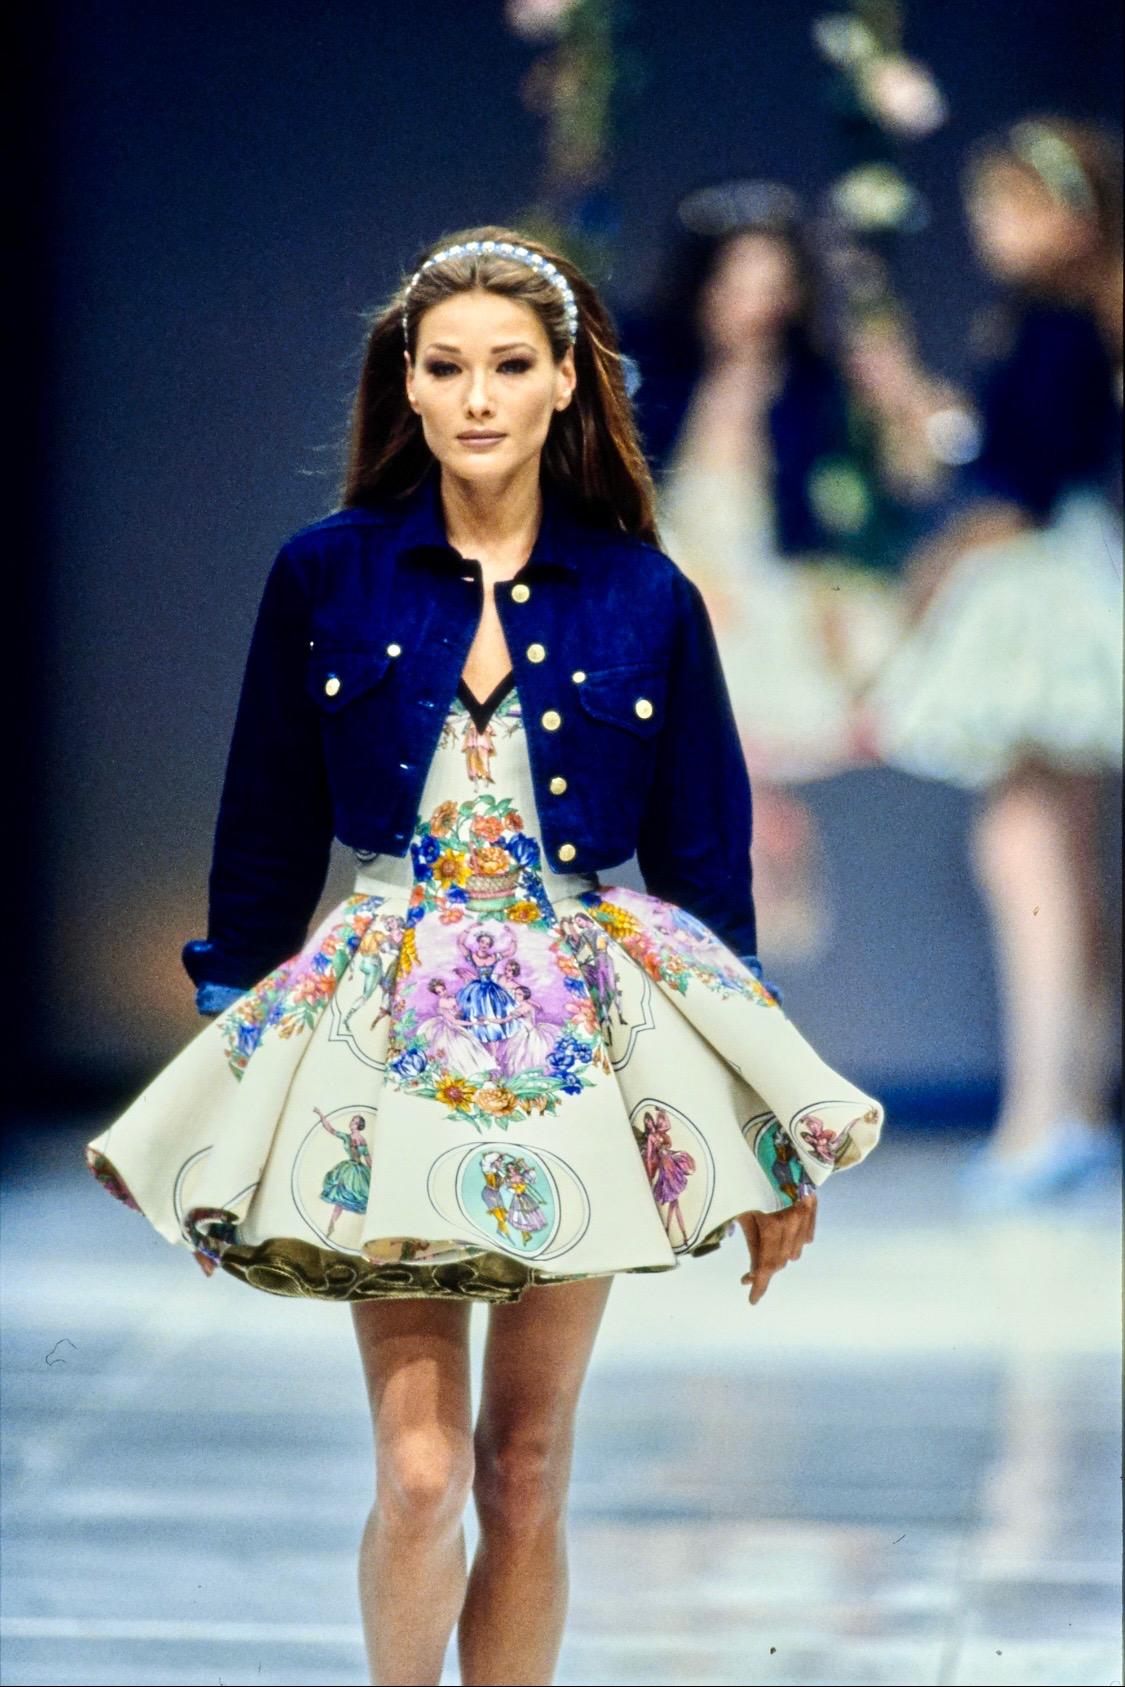 Presenting a blue cotton-blend denim jacket designed by Gianni Versace for his Spring/Summer 1992 collection. Similar jackets were worn on the season's runway over delicate flare dresses on look 1 on Milla Jovovich, look 2 on Carla Bruni, and look 3